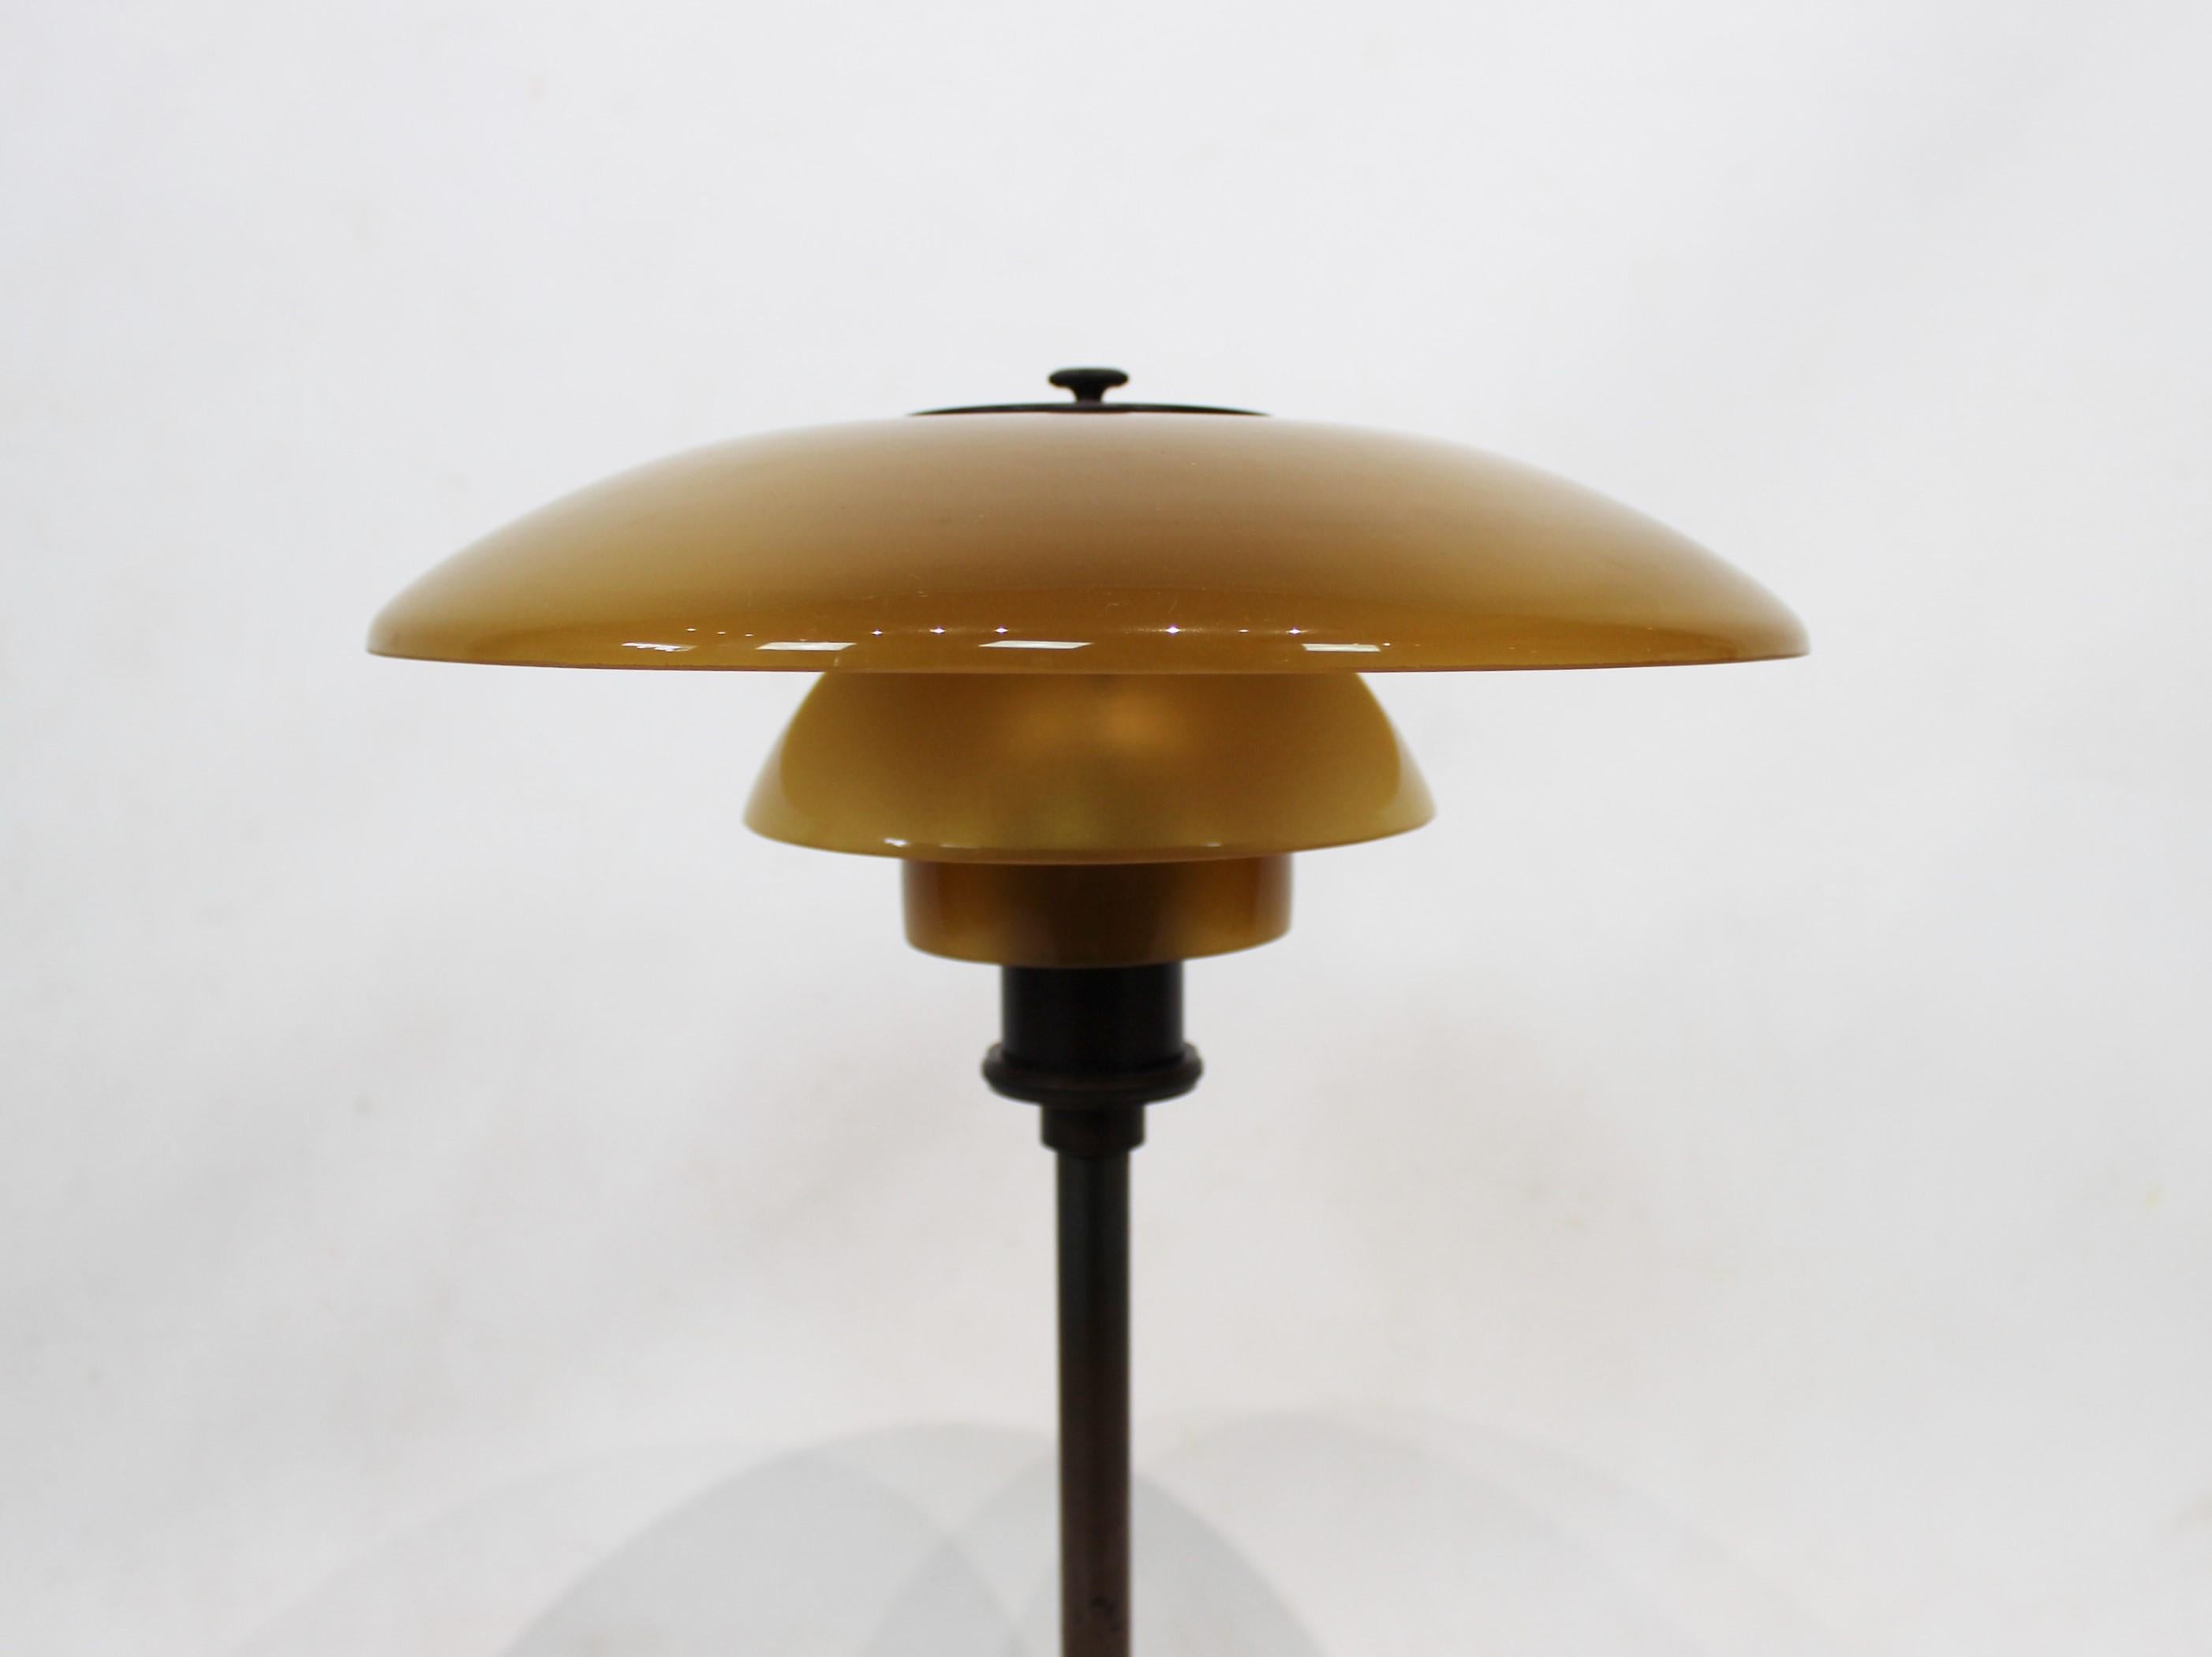 Scandinavian Modern PH 3/2 Tablelamp with Shades of Amber Colored Glass, 1930s